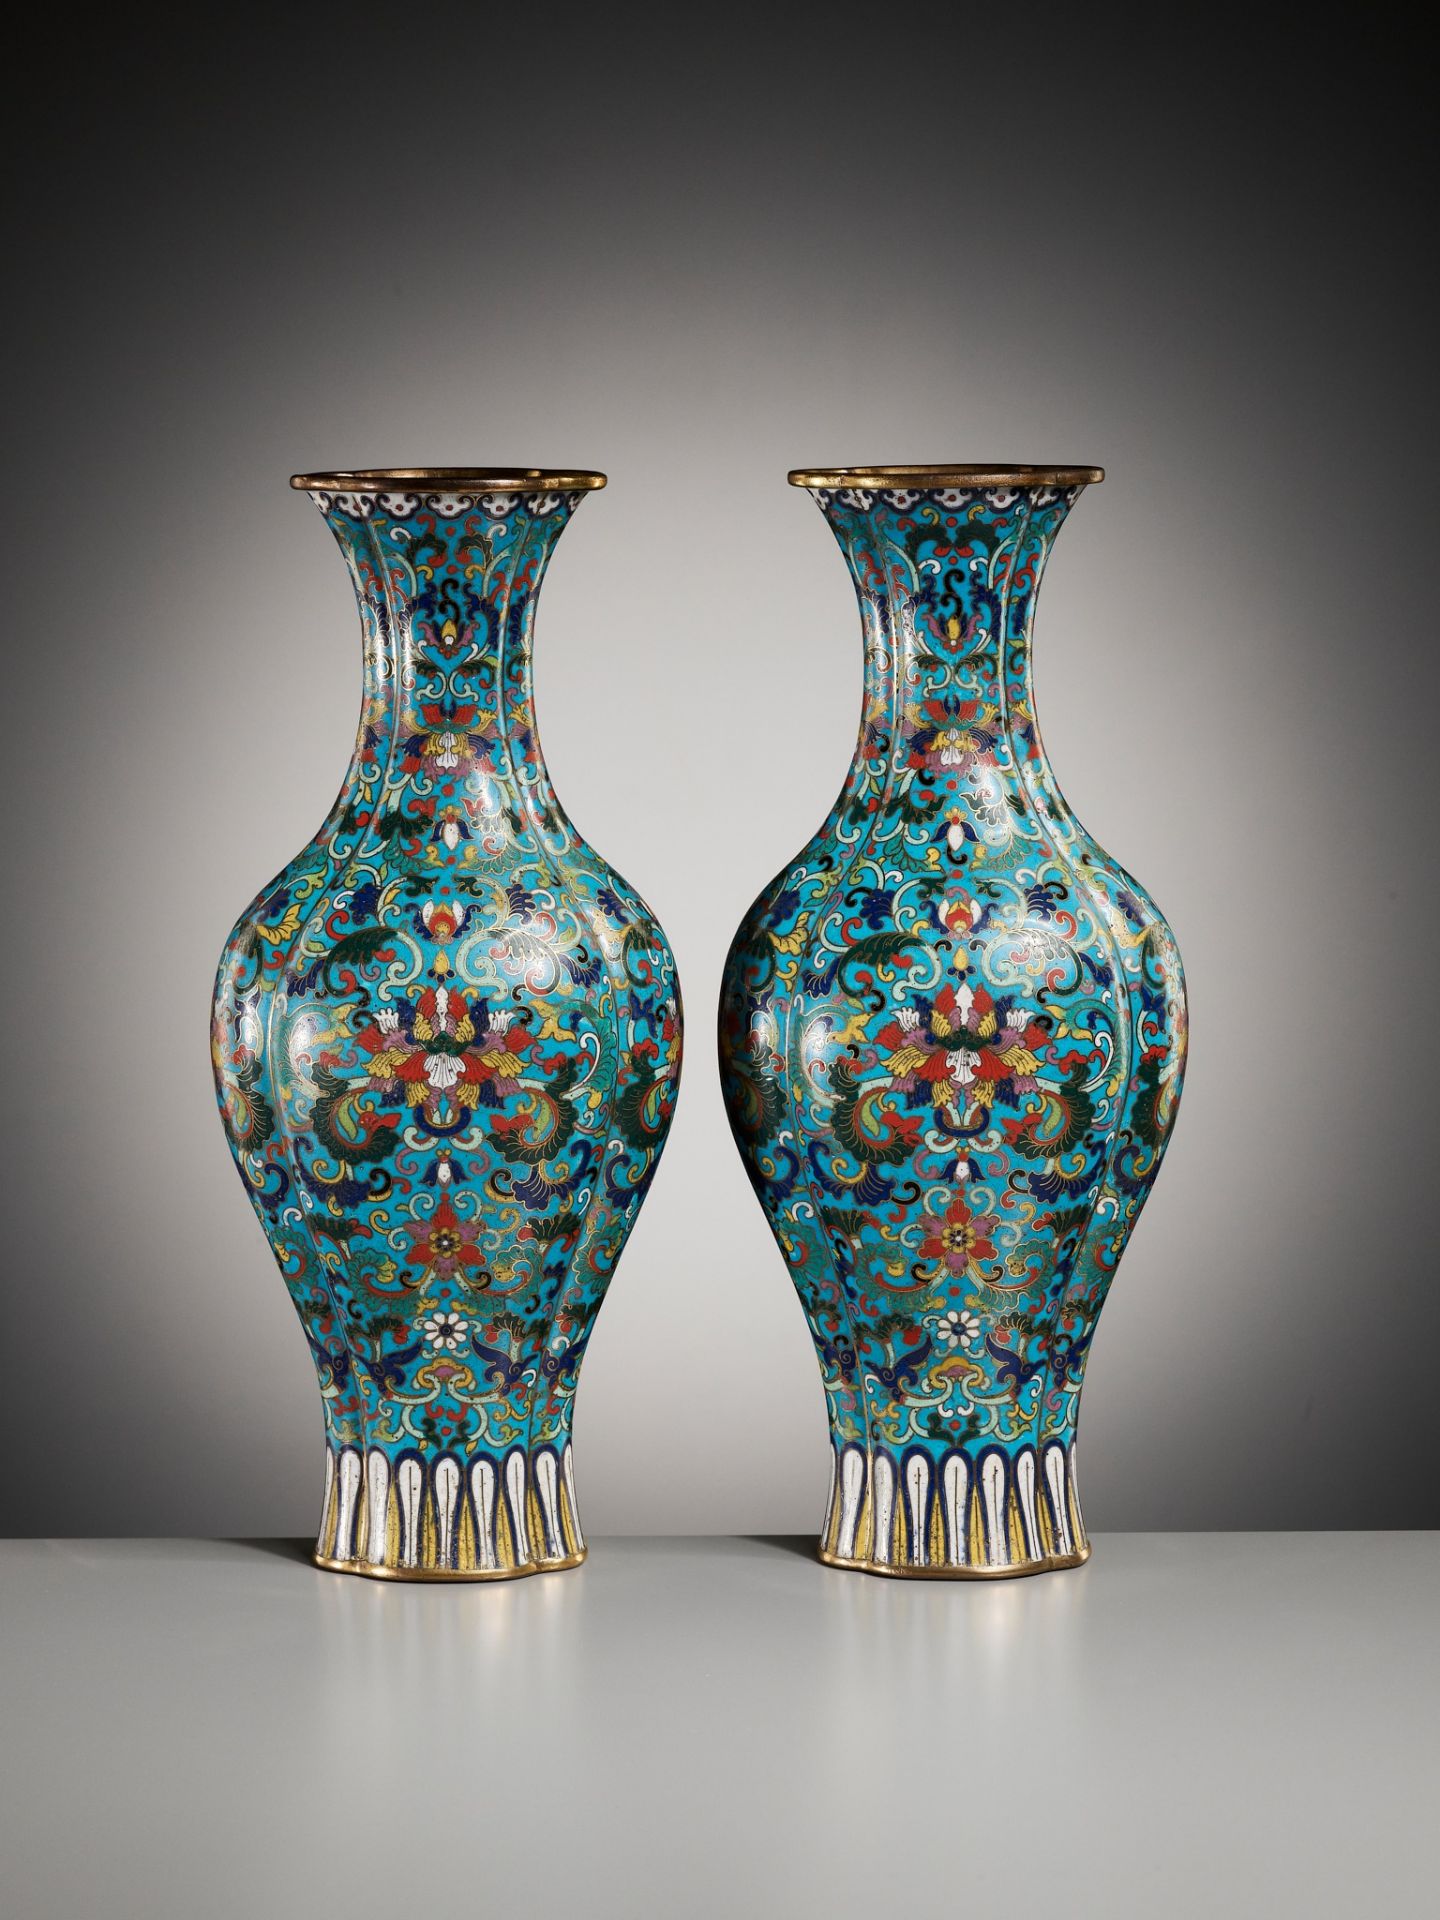 AN IMPERIAL PAIR OF QUADRILOBED CLOISONNÉ ENAMEL ‘LOTUS’ VASES, QIANLONG MARK AND OF THE PERIOD - Image 14 of 17